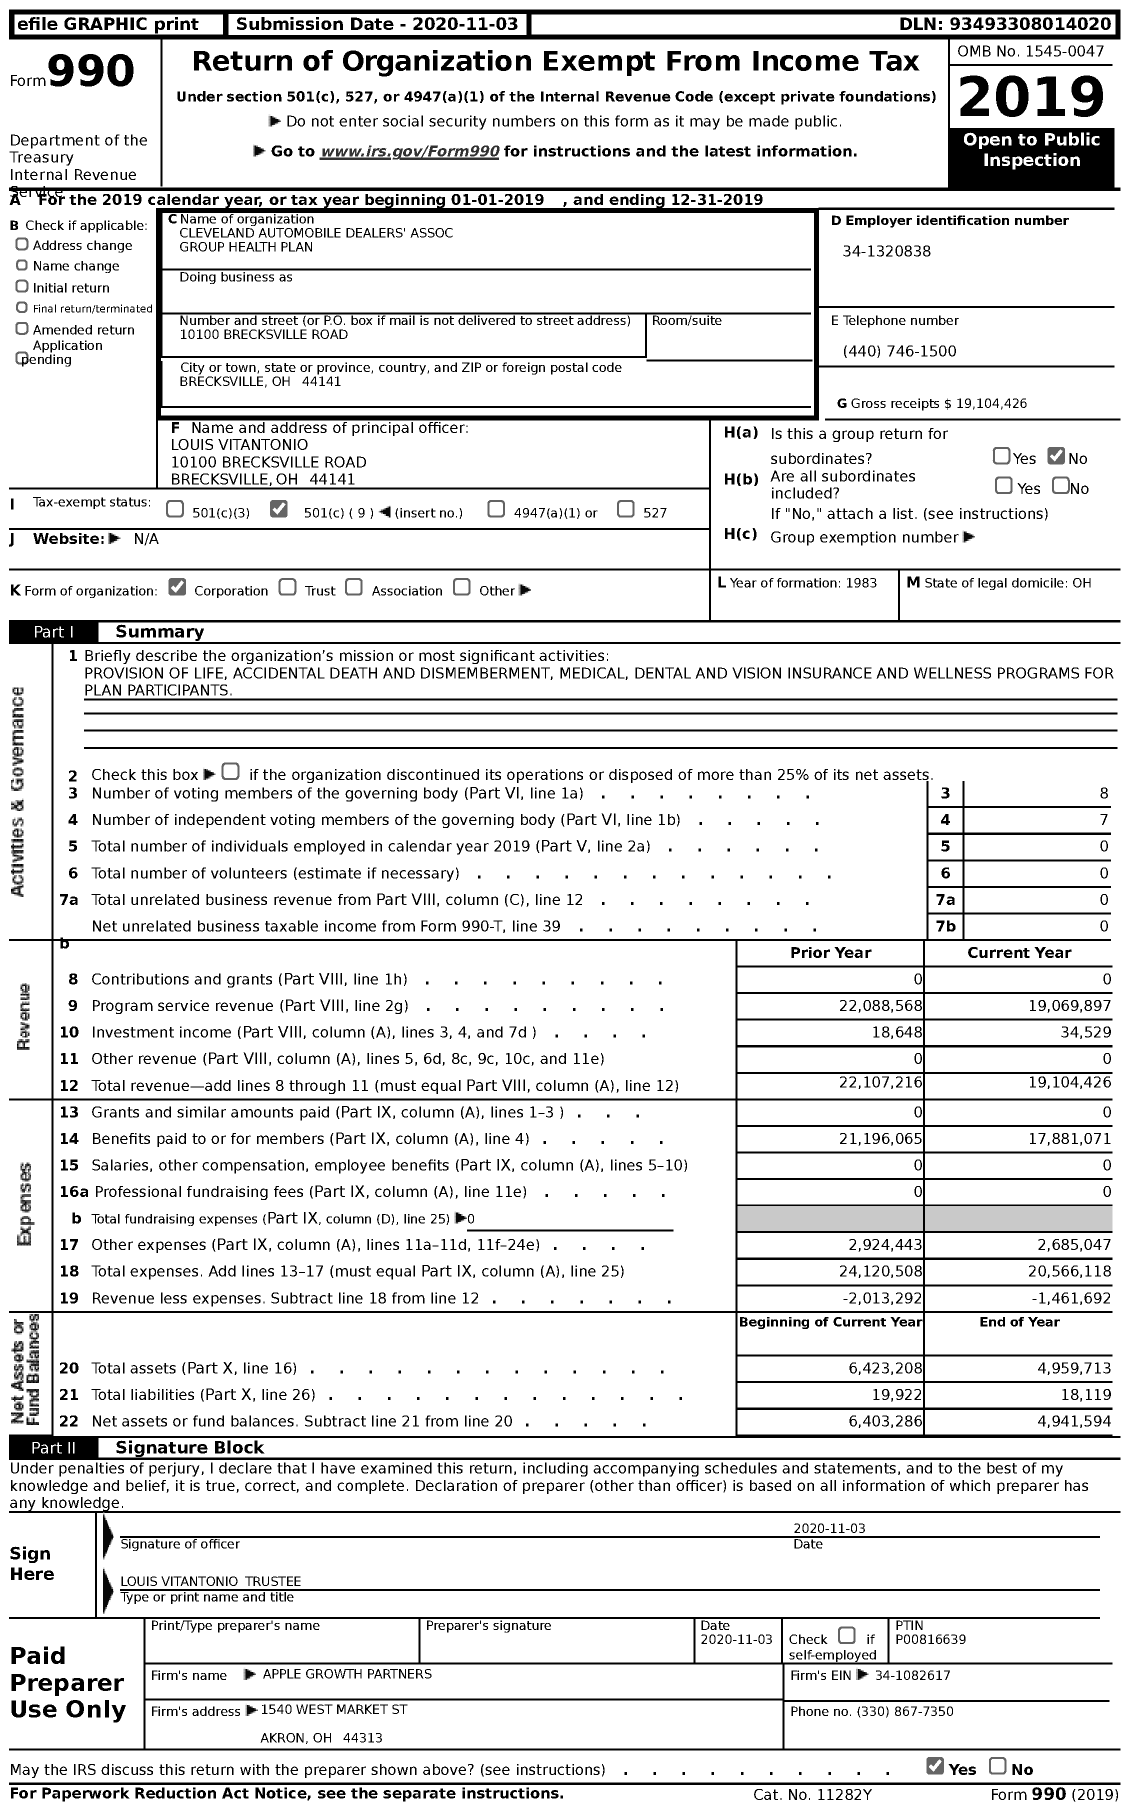 Image of first page of 2019 Form 990 for Cleveland Automobile Dealers' Association Group Health Plan